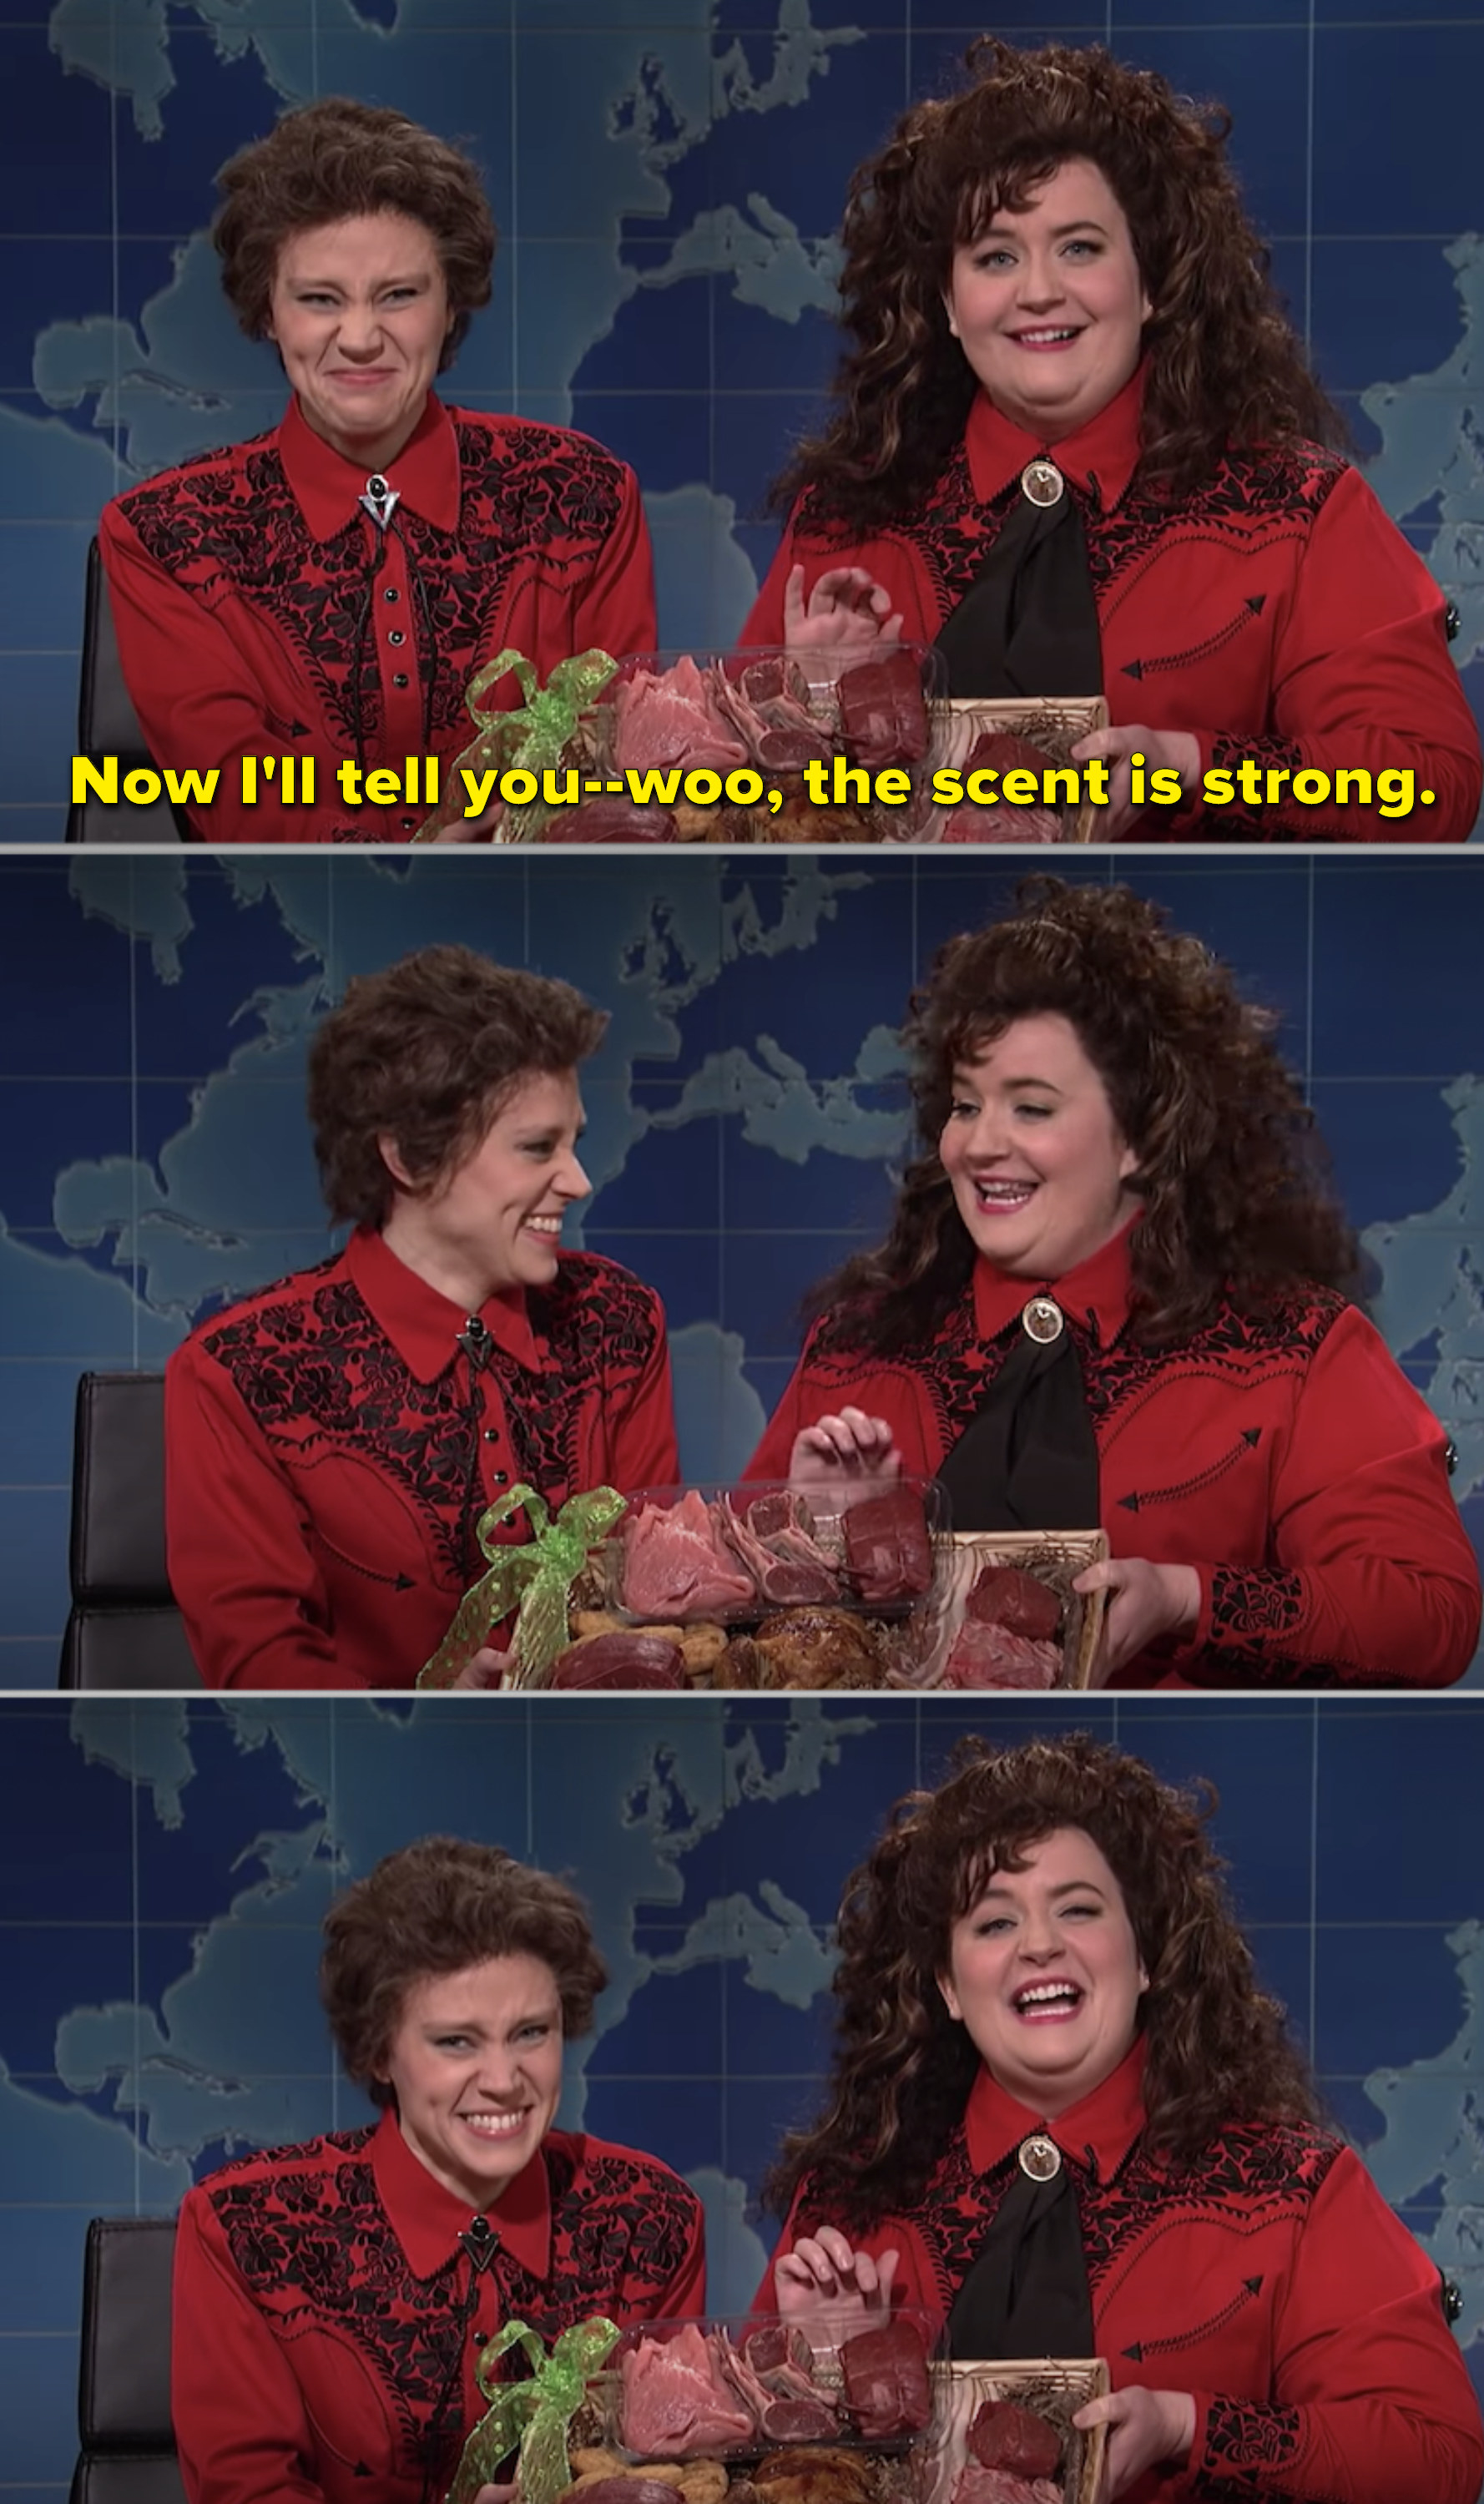 Two people in matching floral shirts and vests on a comedy show, one holding flowers, captioned with dialogue